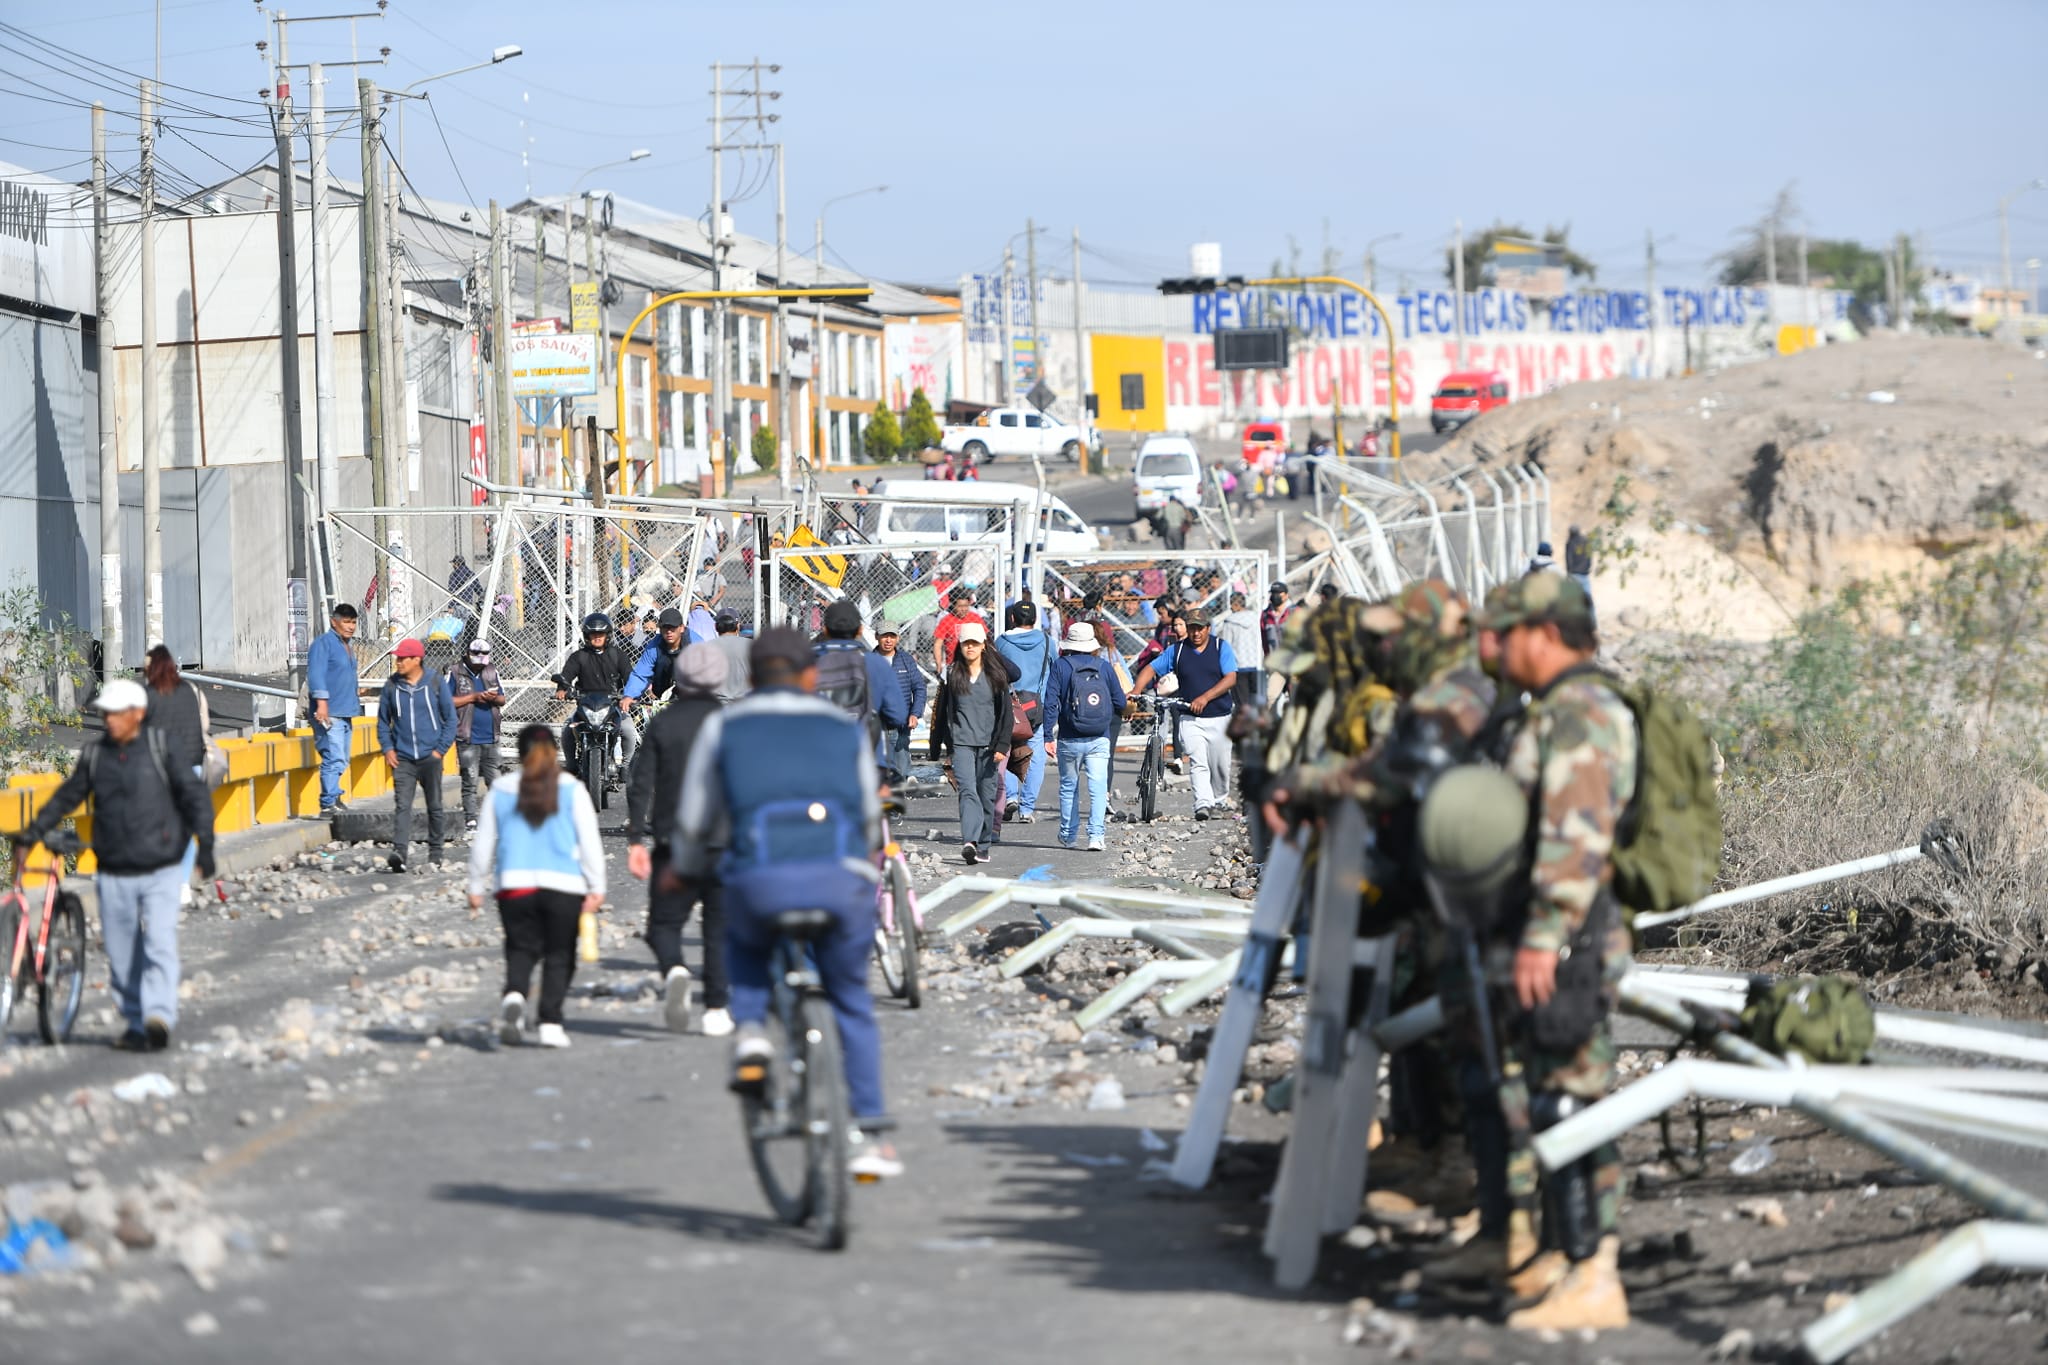 Añashuayco Bridge continues to be blocked by protesters, but pedestrian traffic is free (Diego Ramos | HBA Noticias)